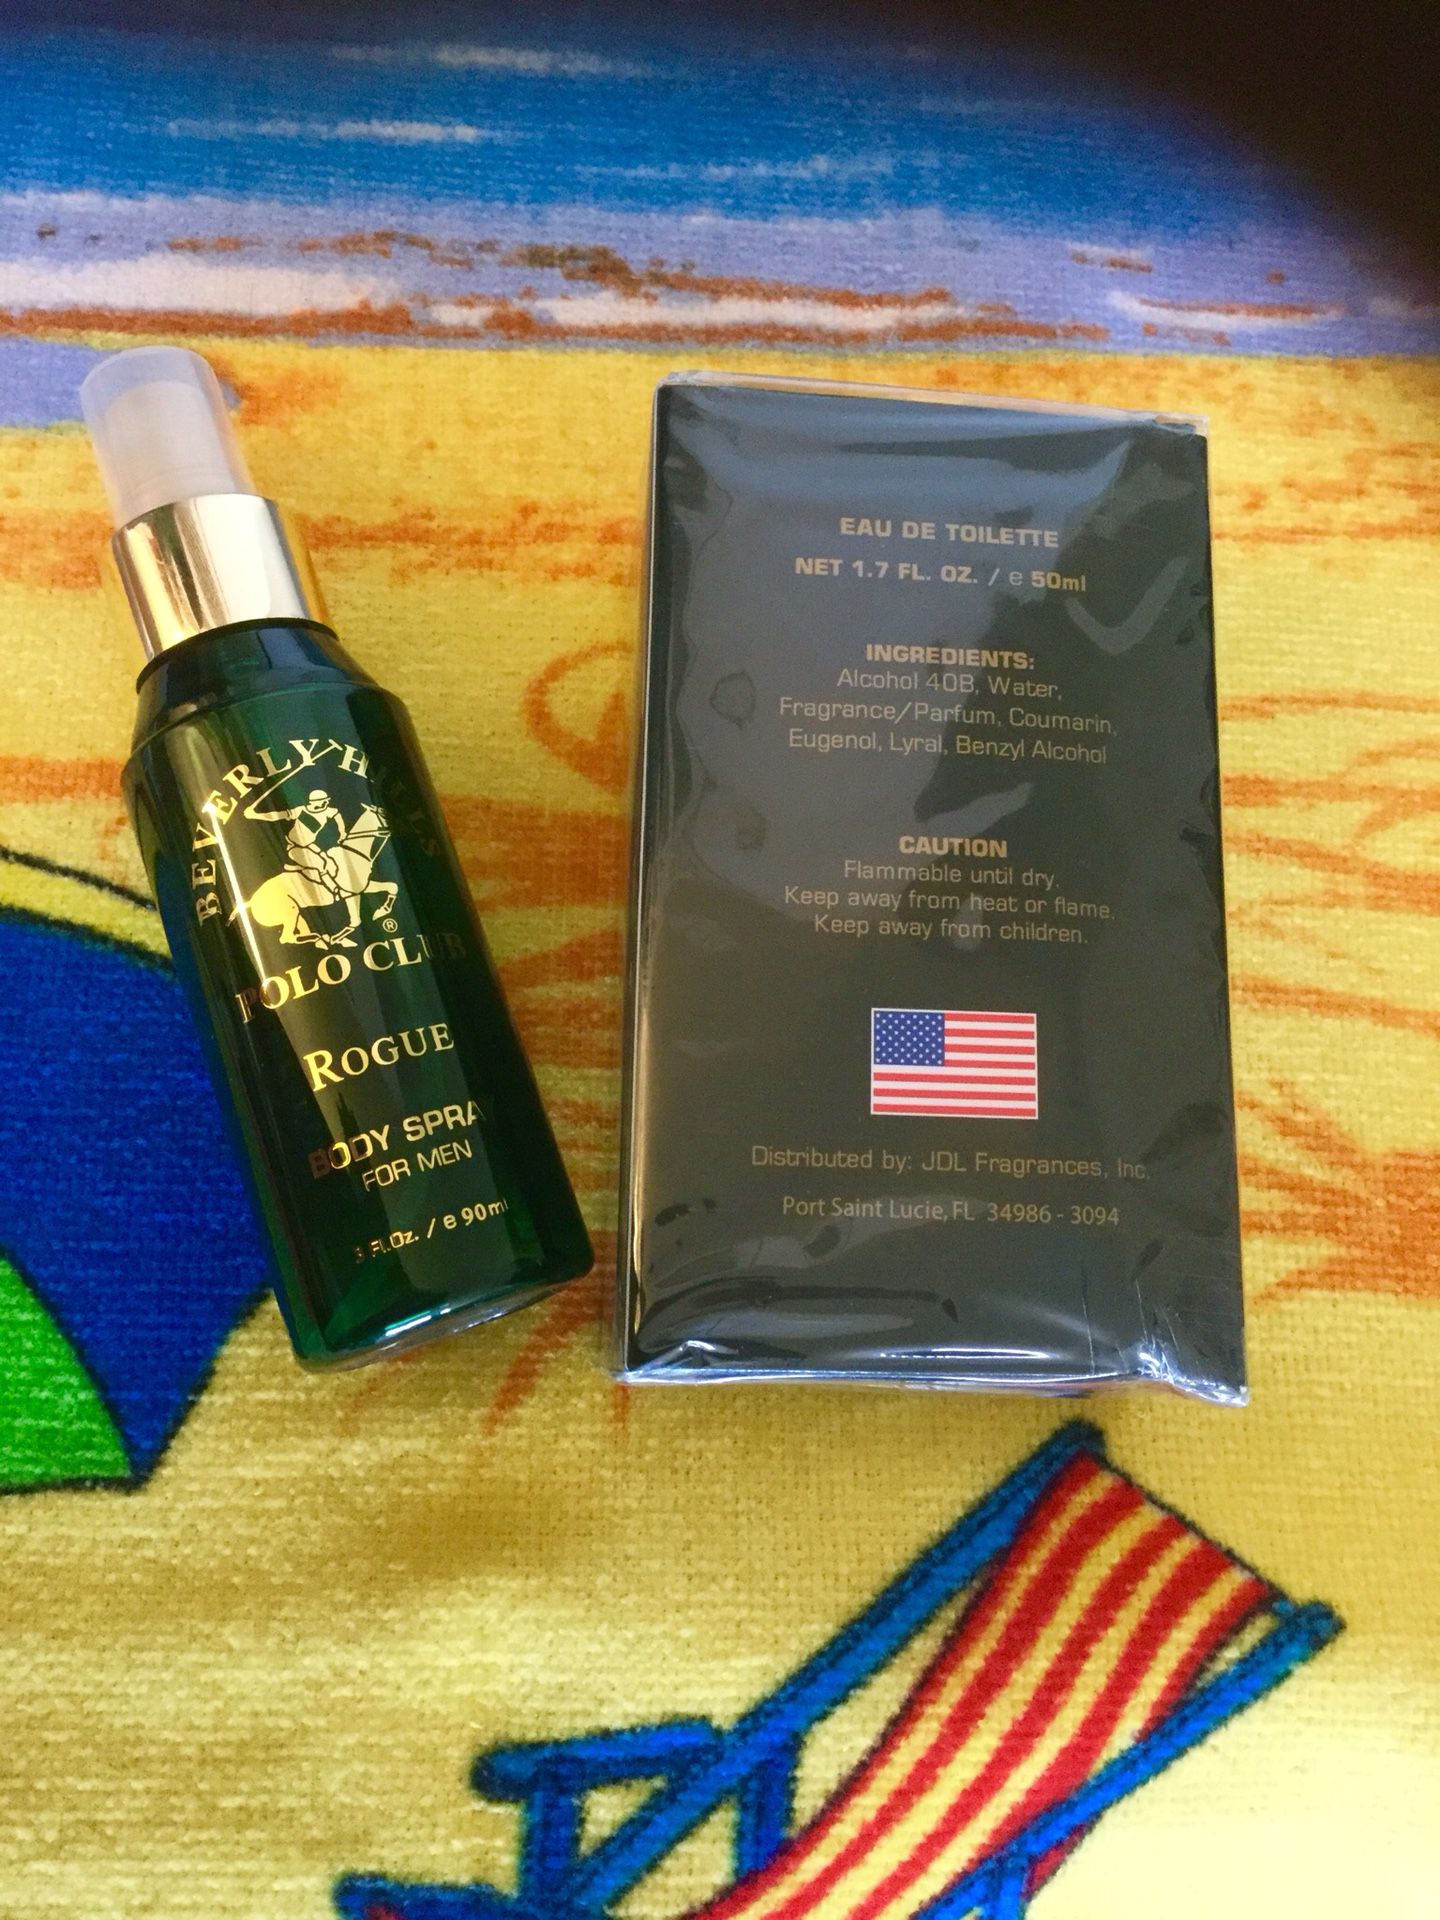 Beverly Hills Polo Club Cologne for Men with Polo club men body spray / 2 New items for $25 🐎 🎩